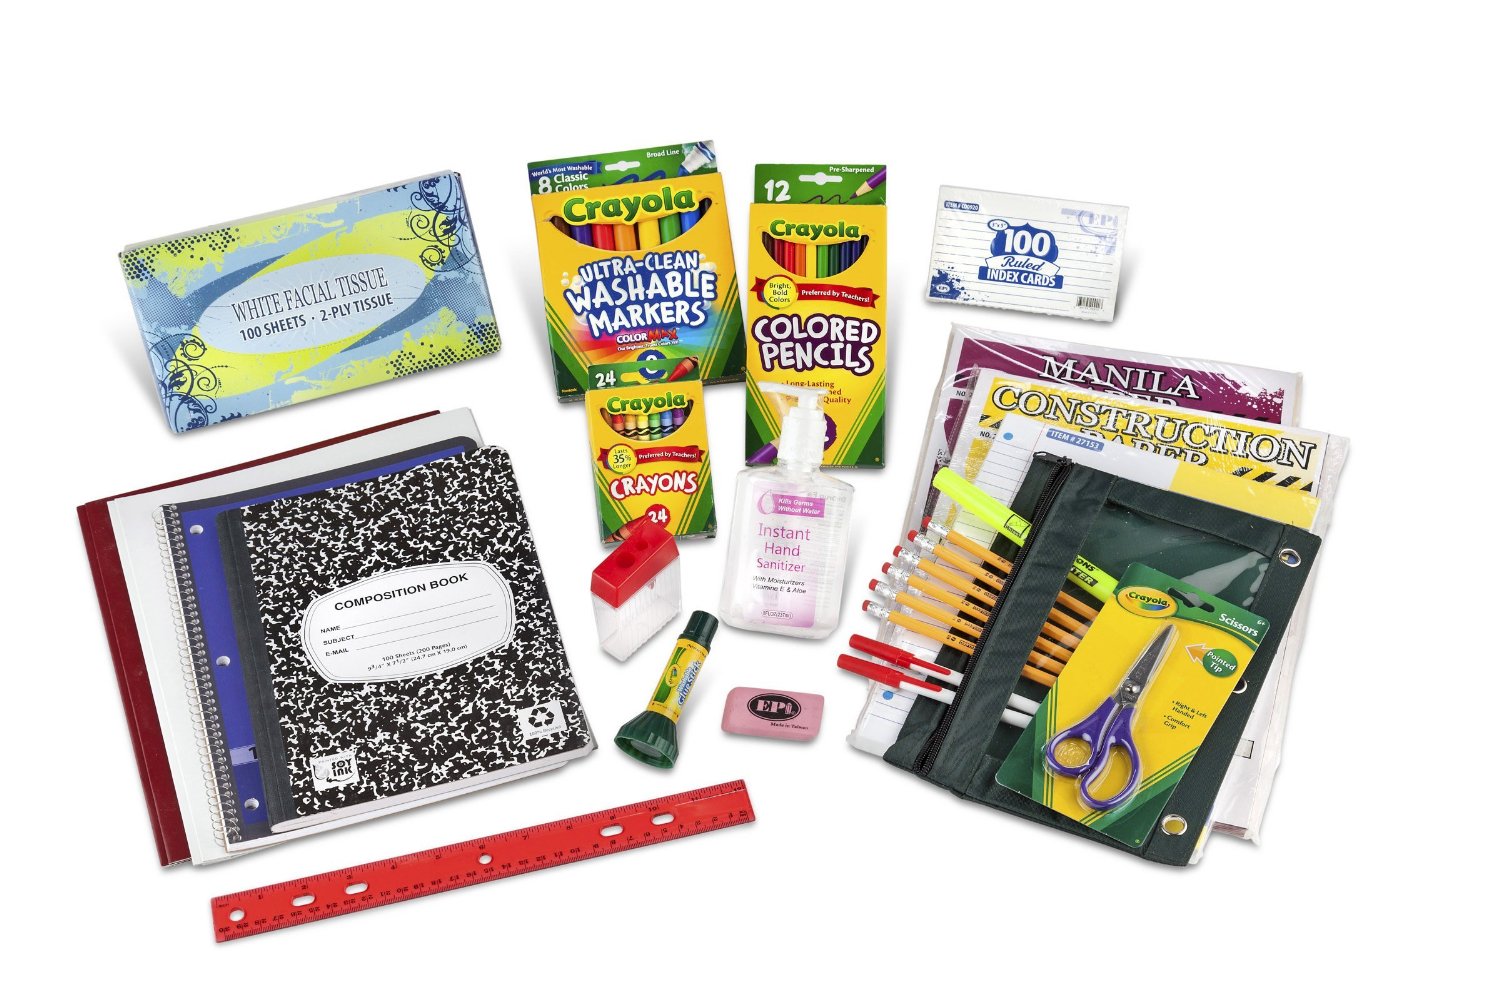 Up to 50% off select Crayola products!